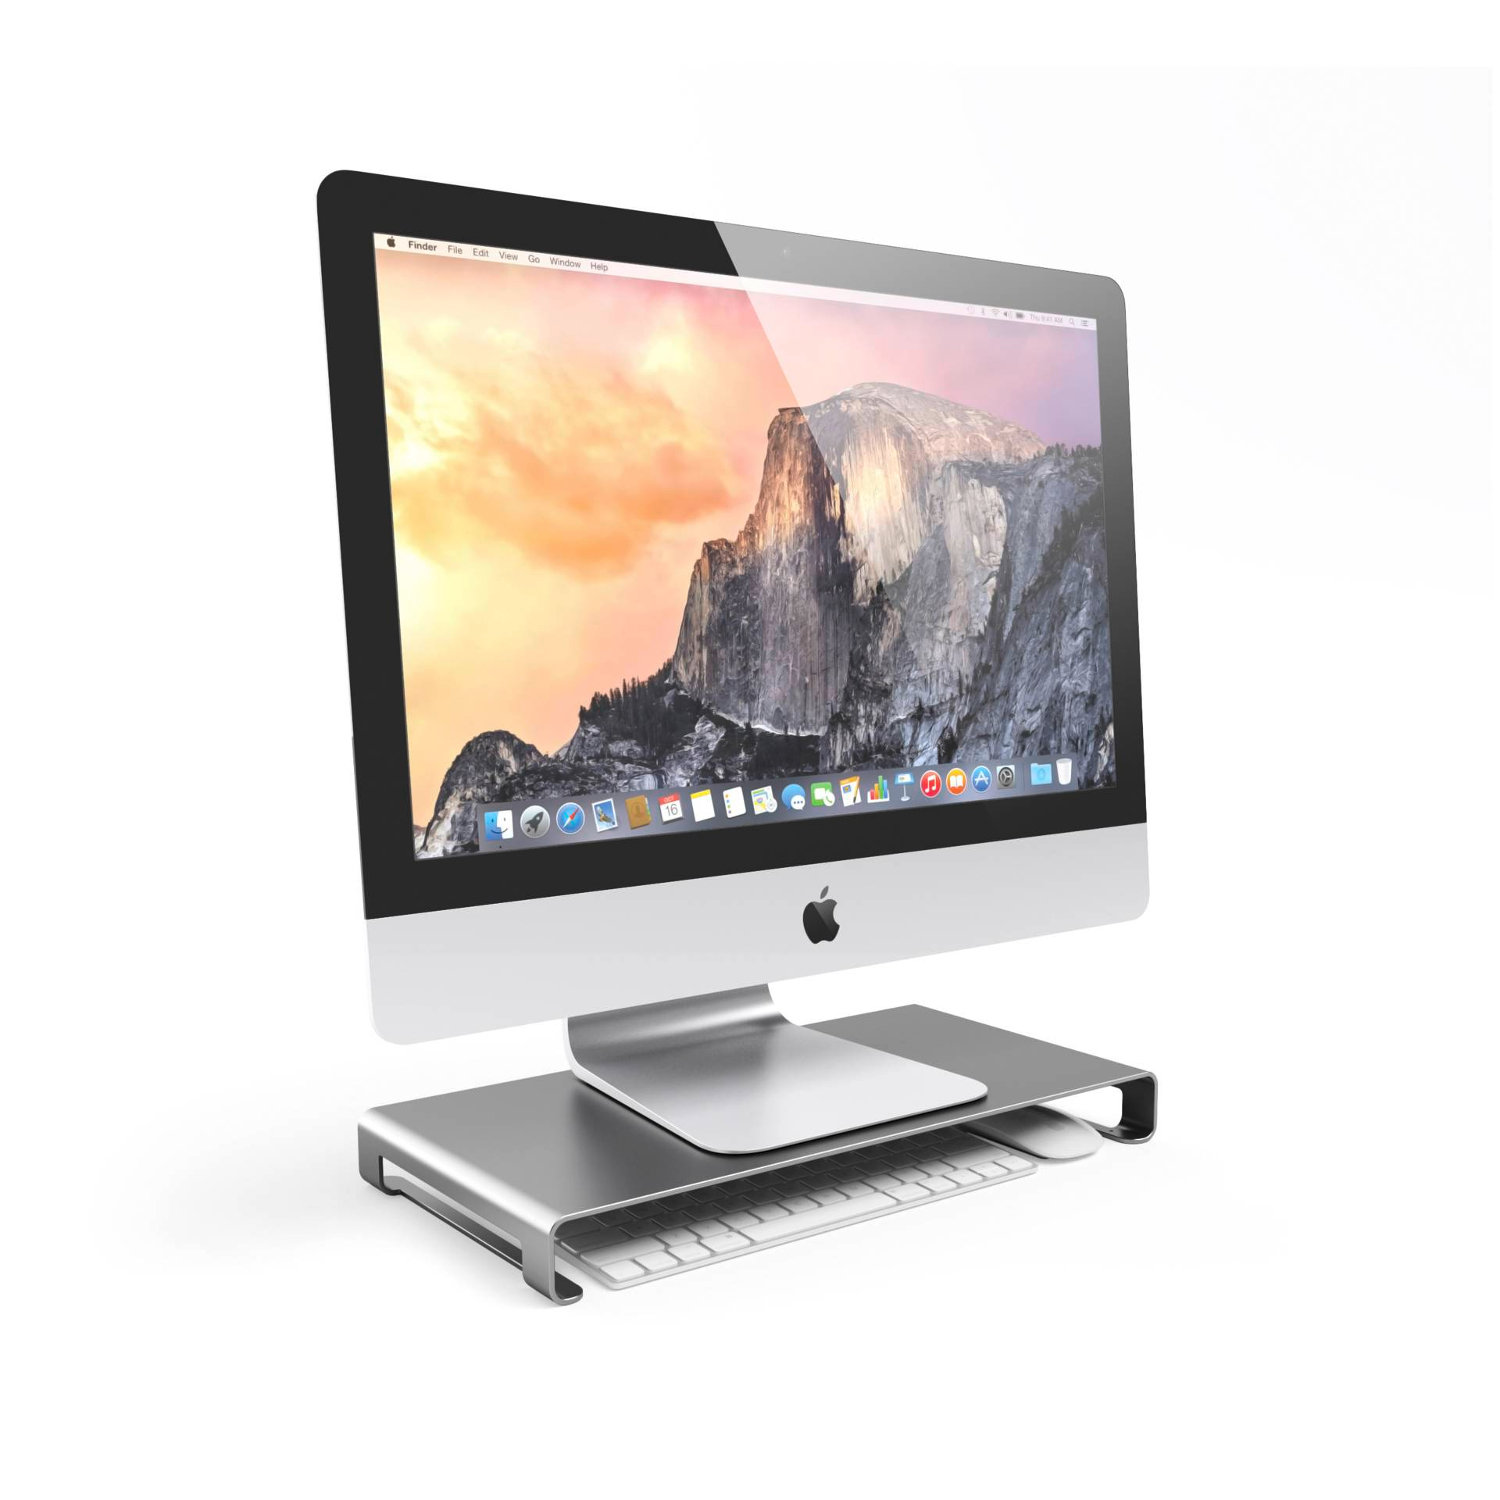 Satechi Aluminium monitor stand shown with iMac with keyboard tucked under